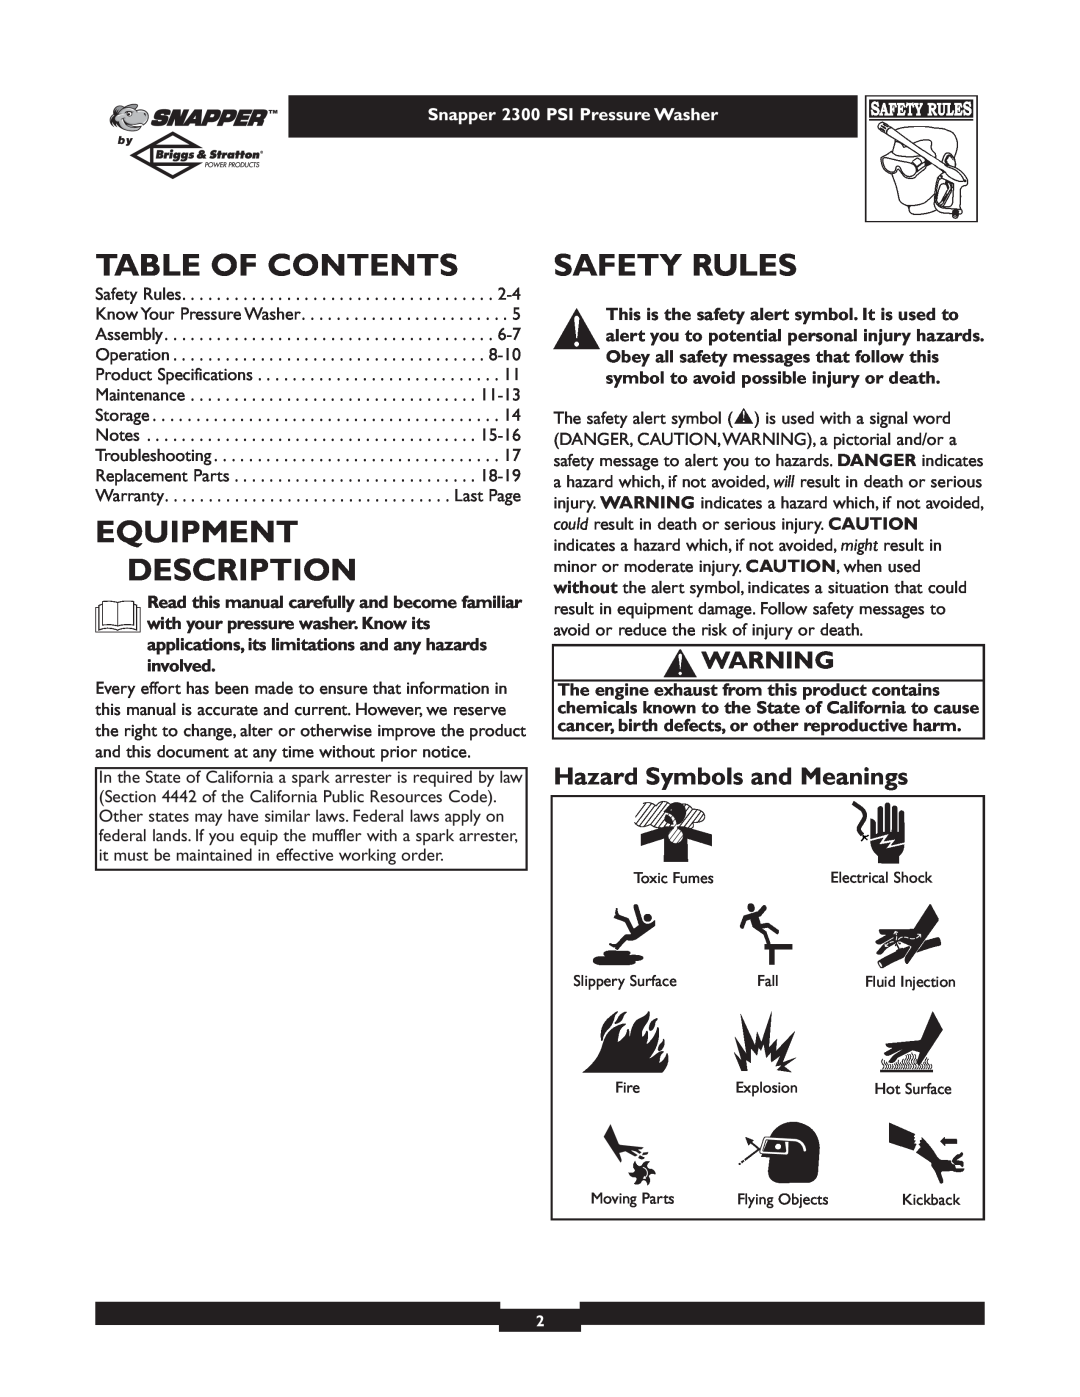 Snapper 1807-1 owner manual Table Of Contents, Equipment Description, Safety Rules, Hazard Symbols and Meanings 